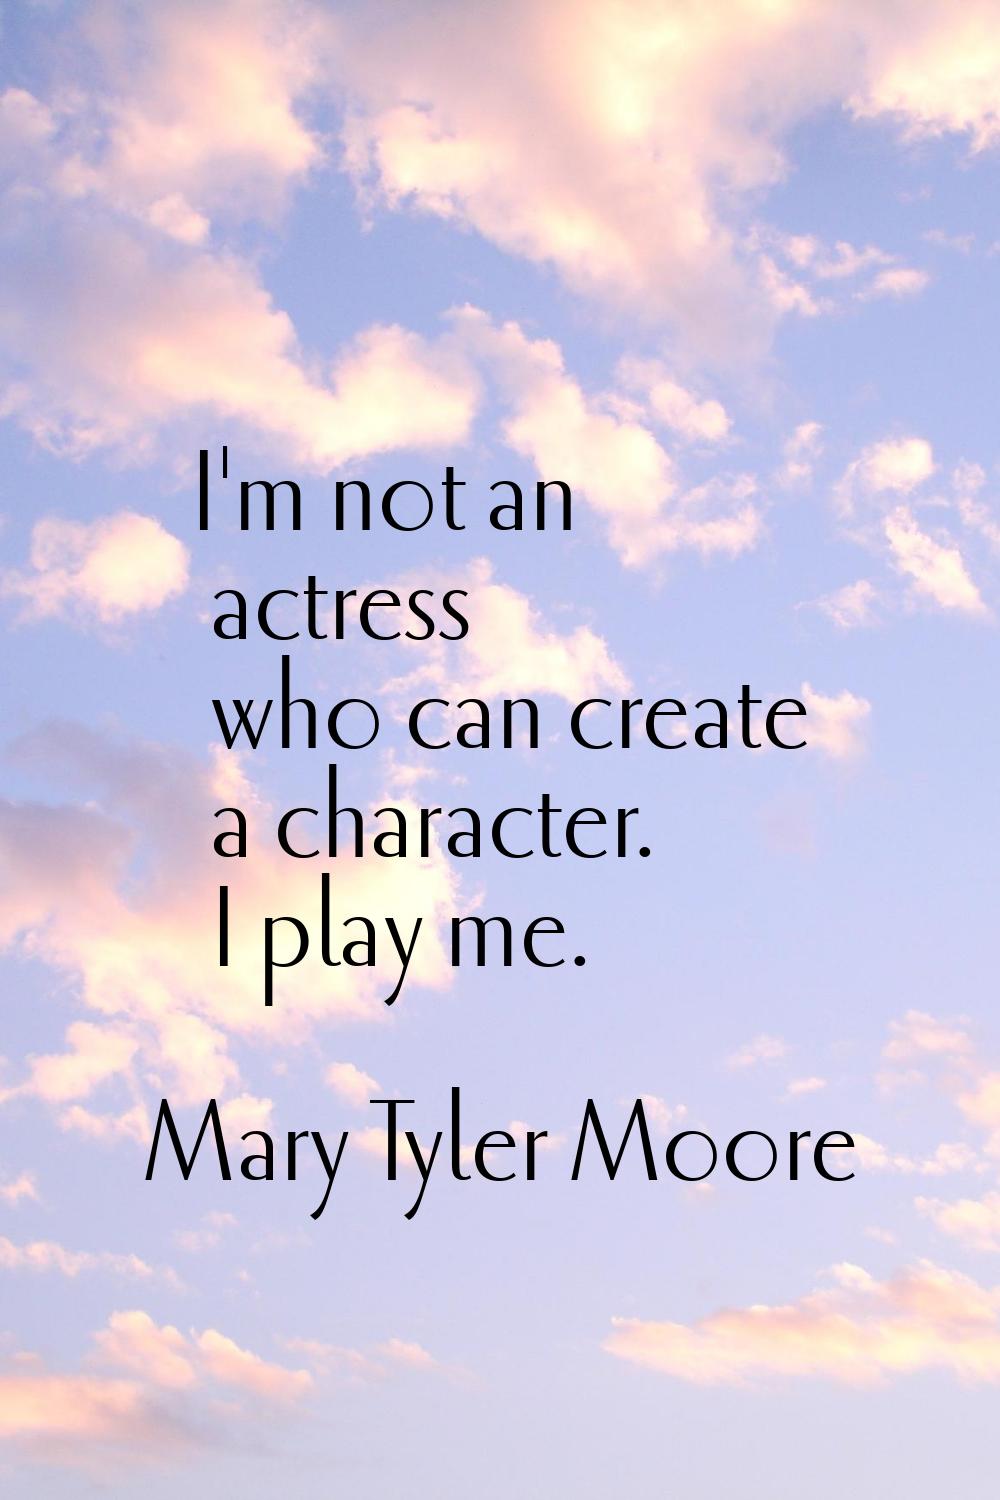 I'm not an actress who can create a character. I play me.